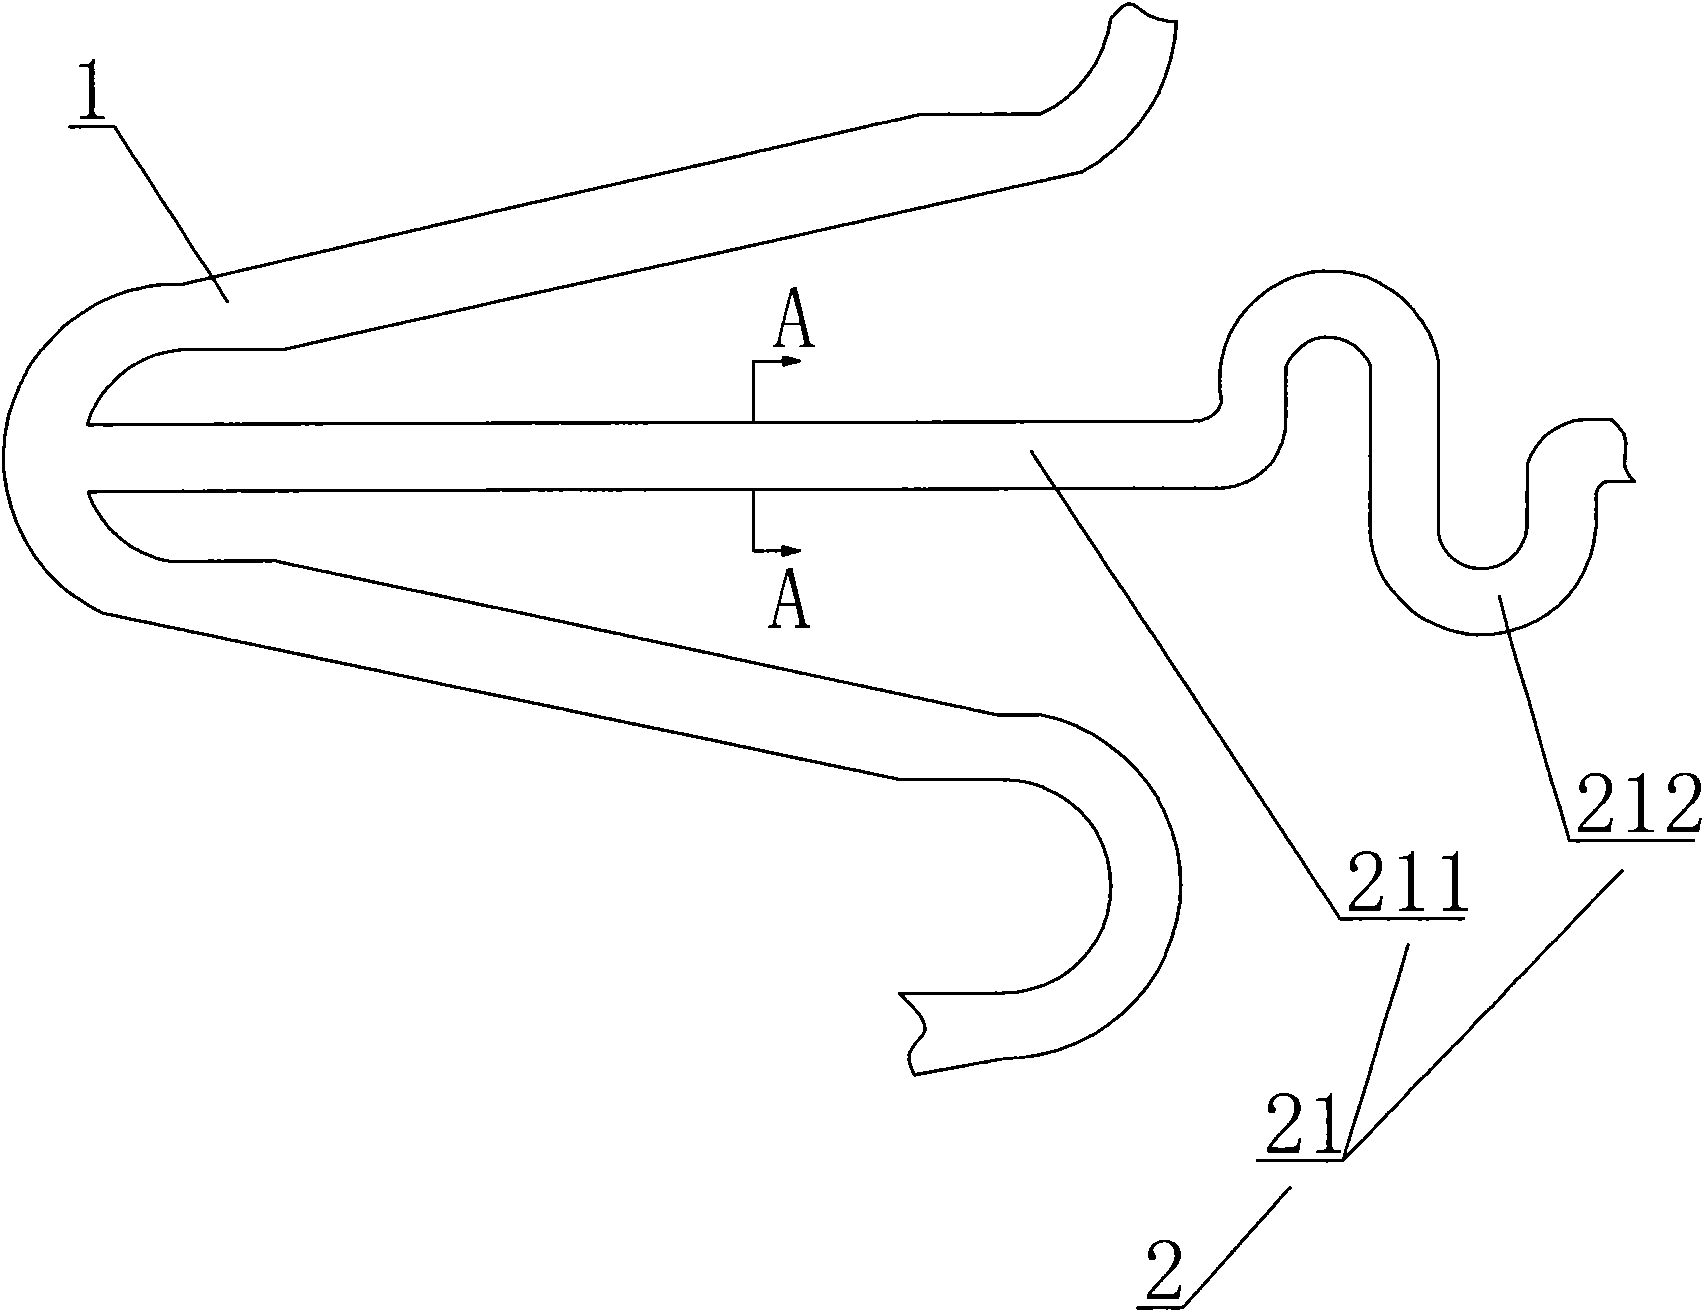 Intracranial sirolimus medicament-release blood vessel stent and preparation method thereof